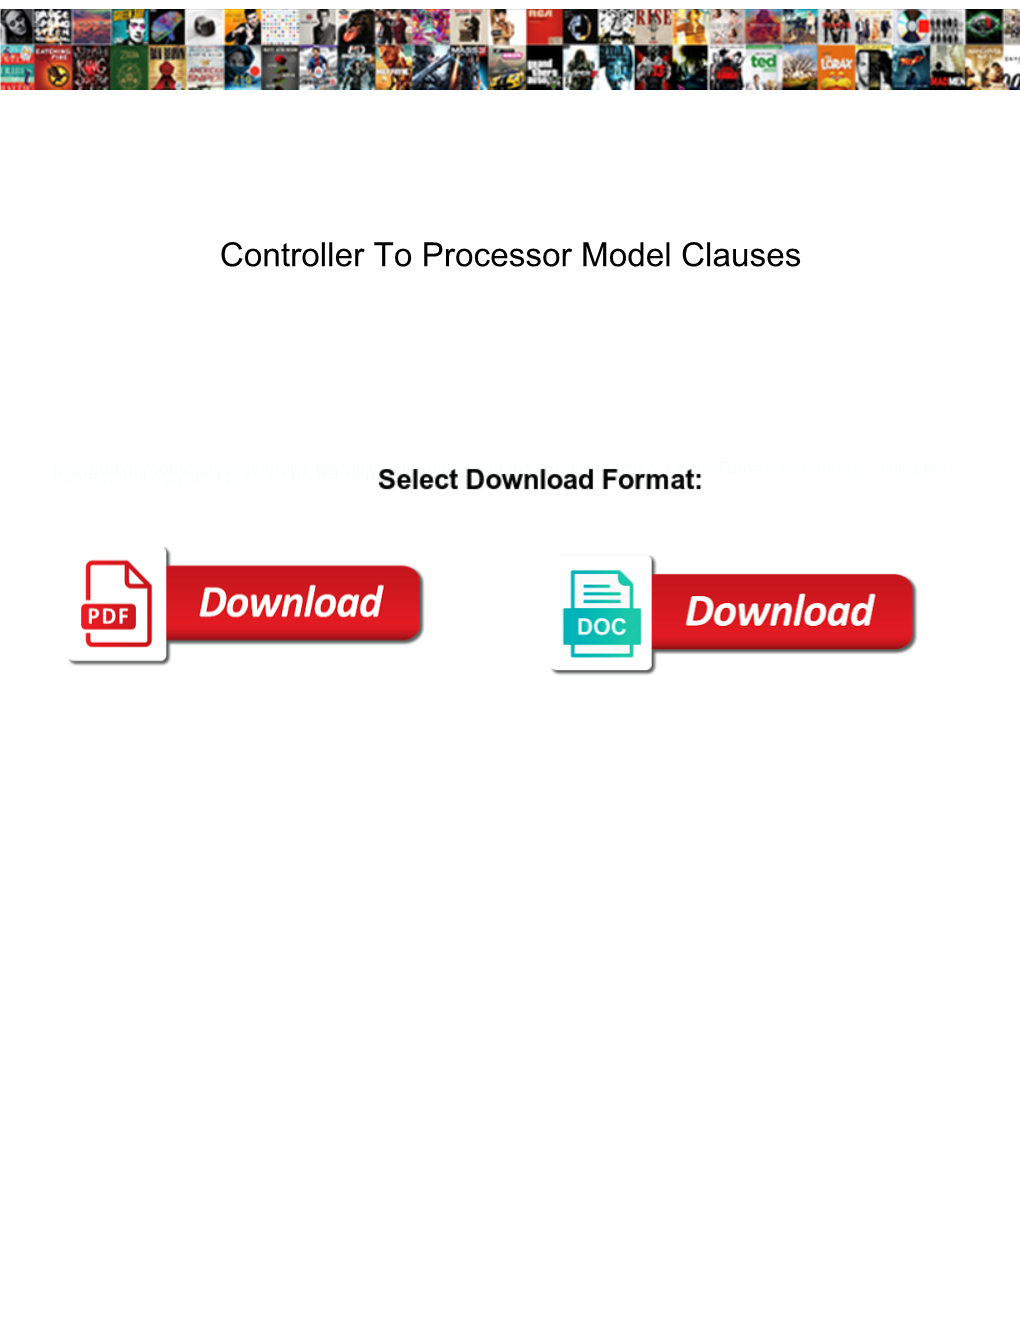 Controller to Processor Model Clauses